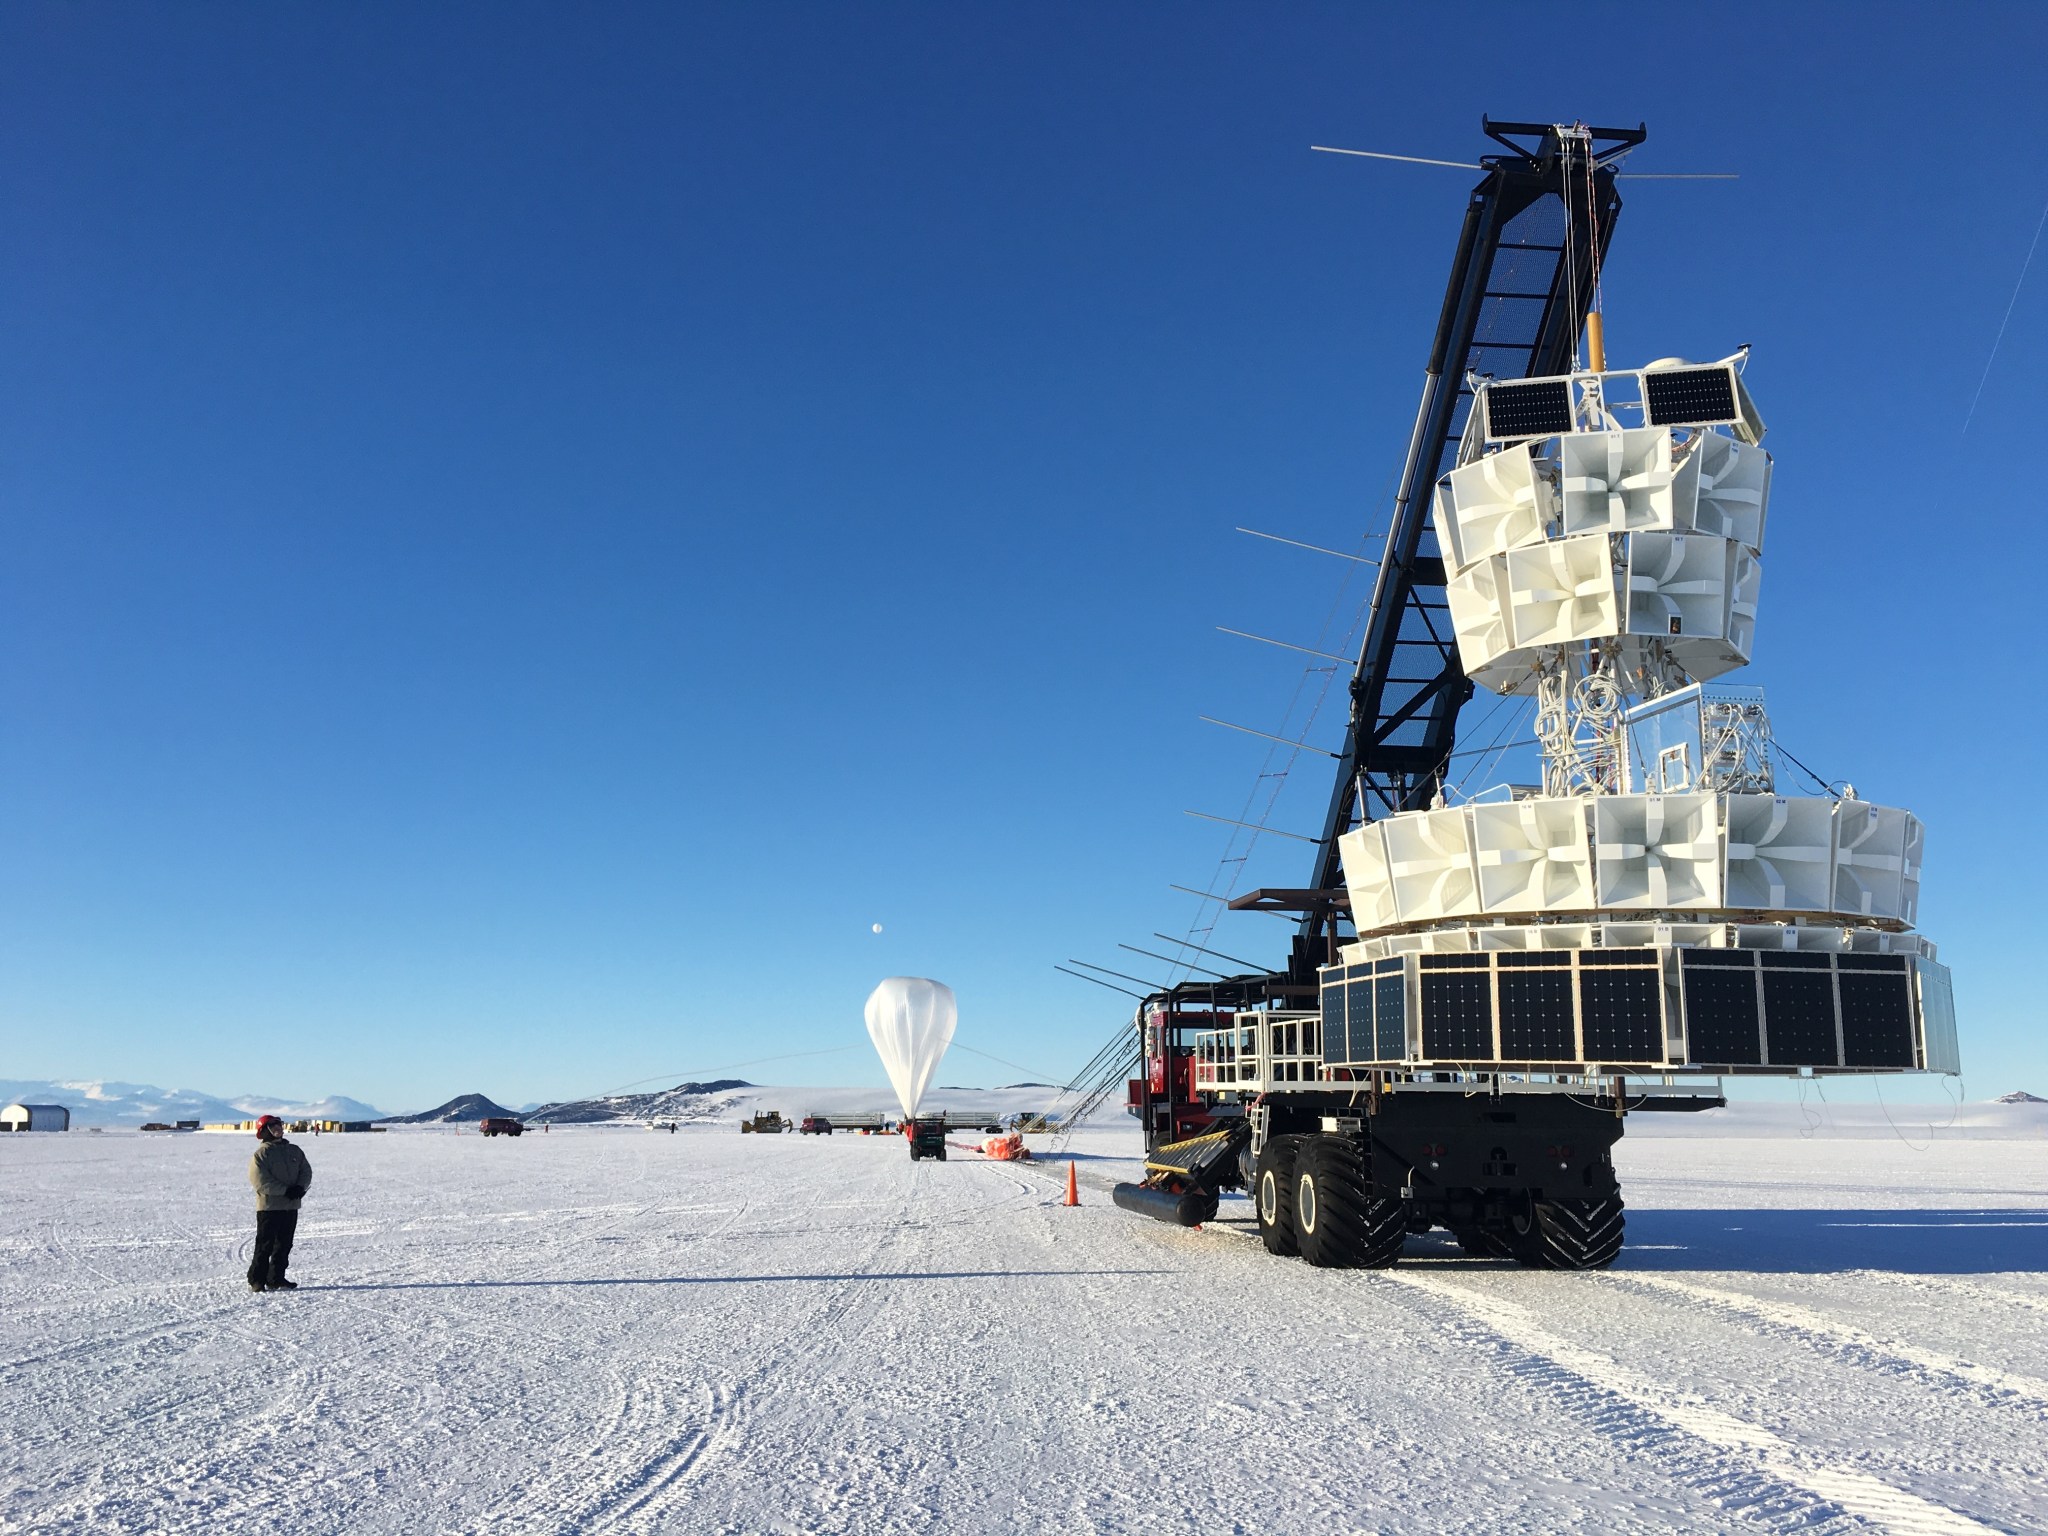 The ANITA payload, an instrument made up of many white boxes formed a circle  tube structure, hangs from a crane with a scientific balloon in the background against a blue sky and white, snowy surface.